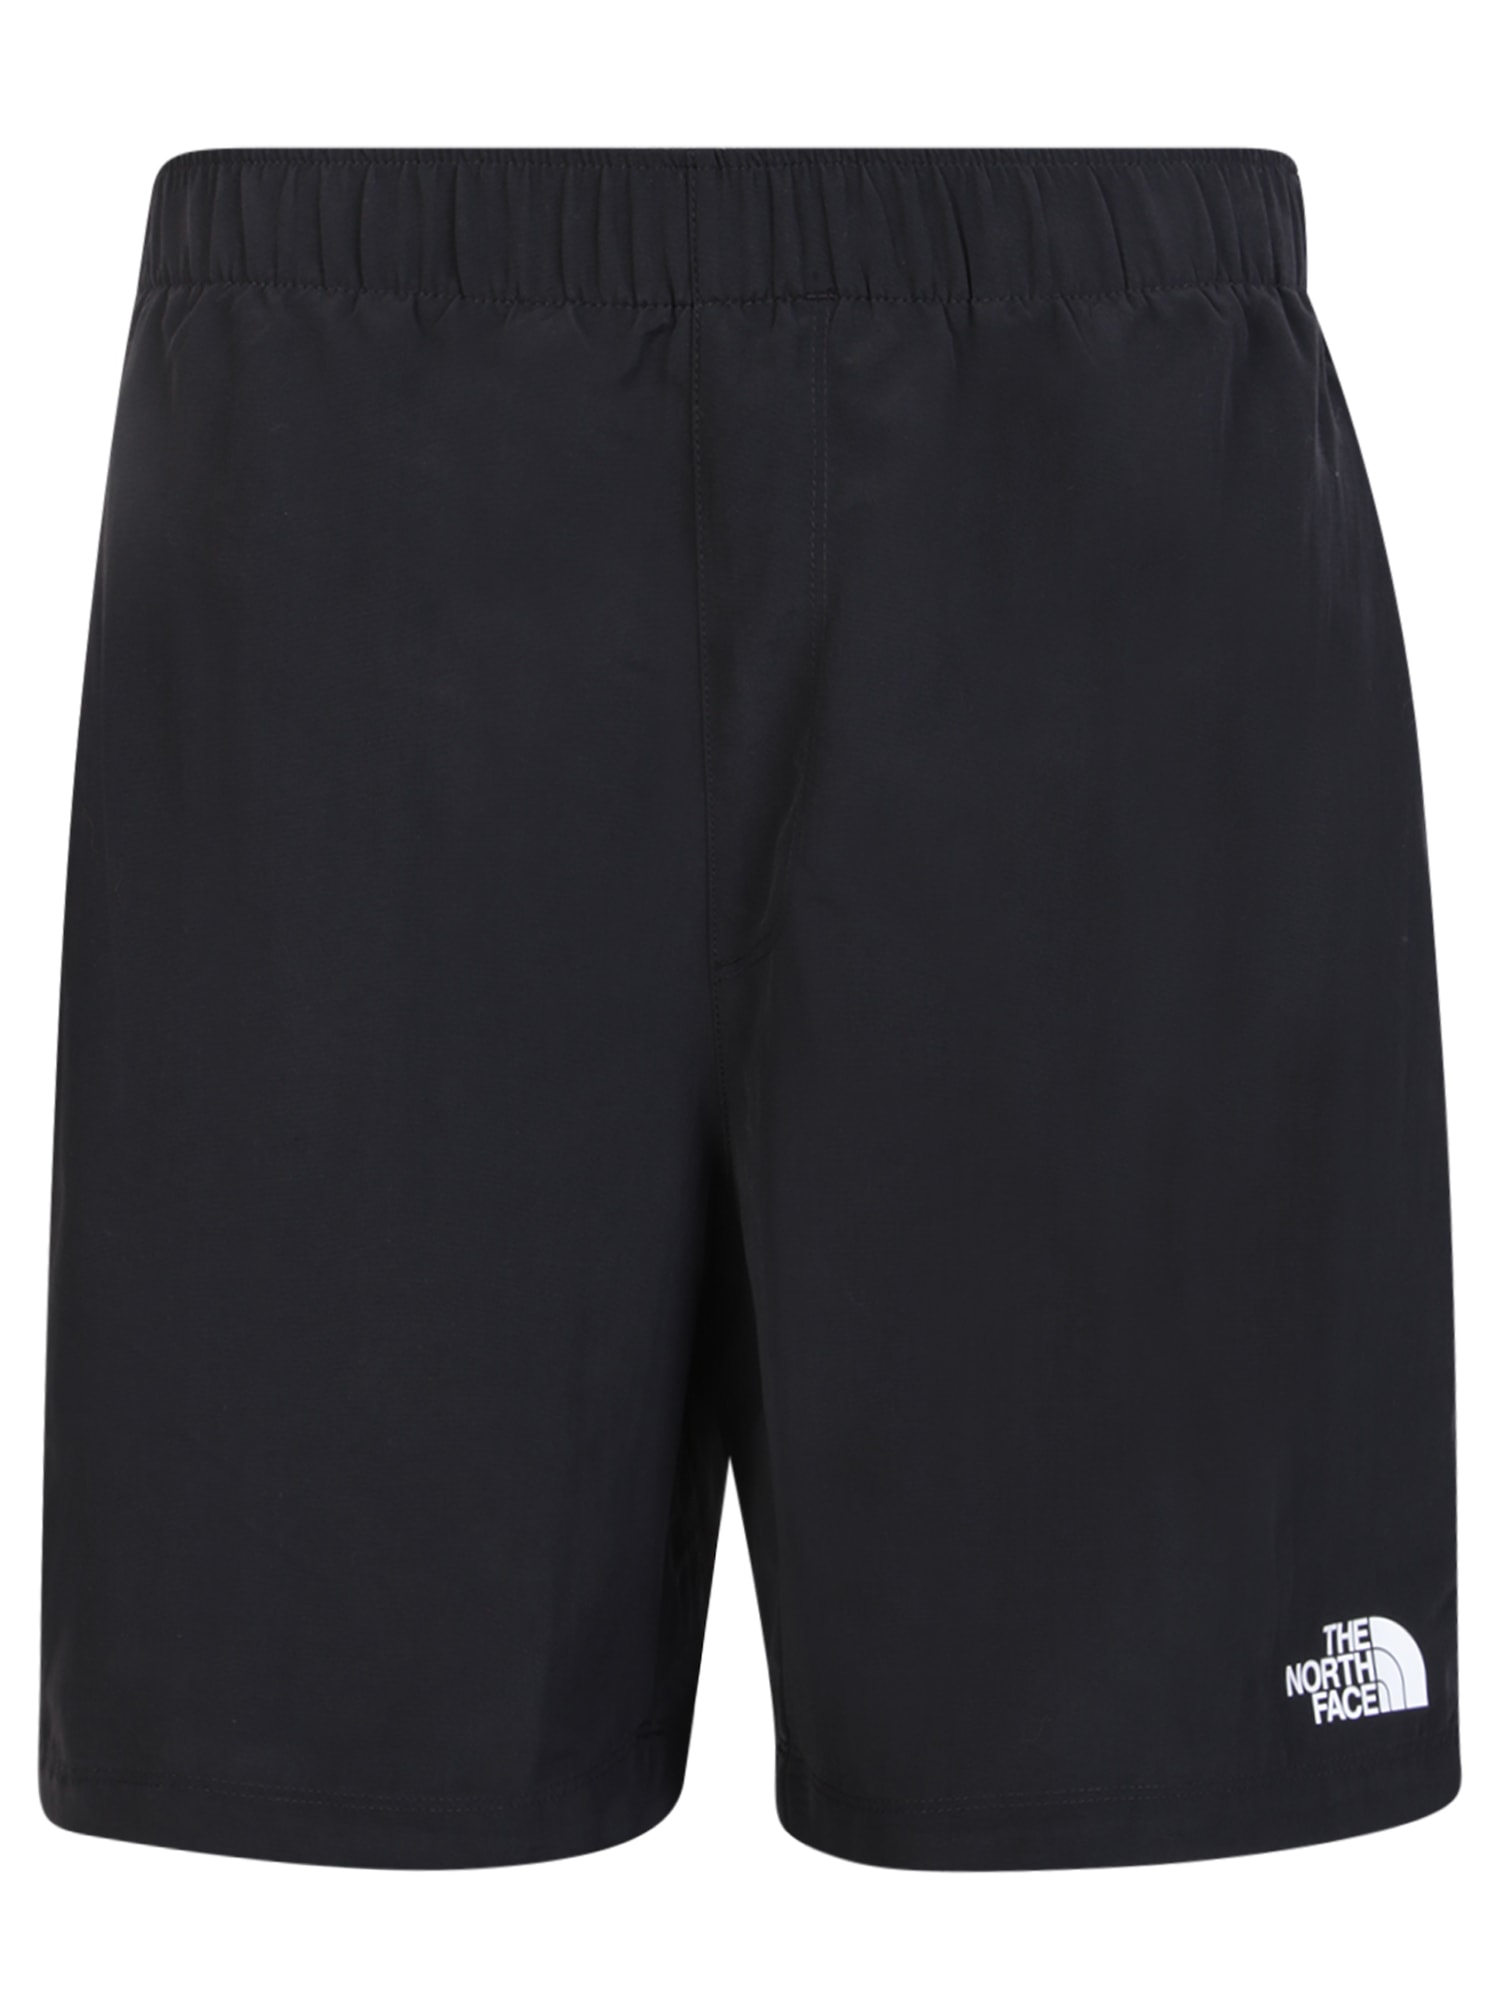 The North Face Shorts Dry Water In Black